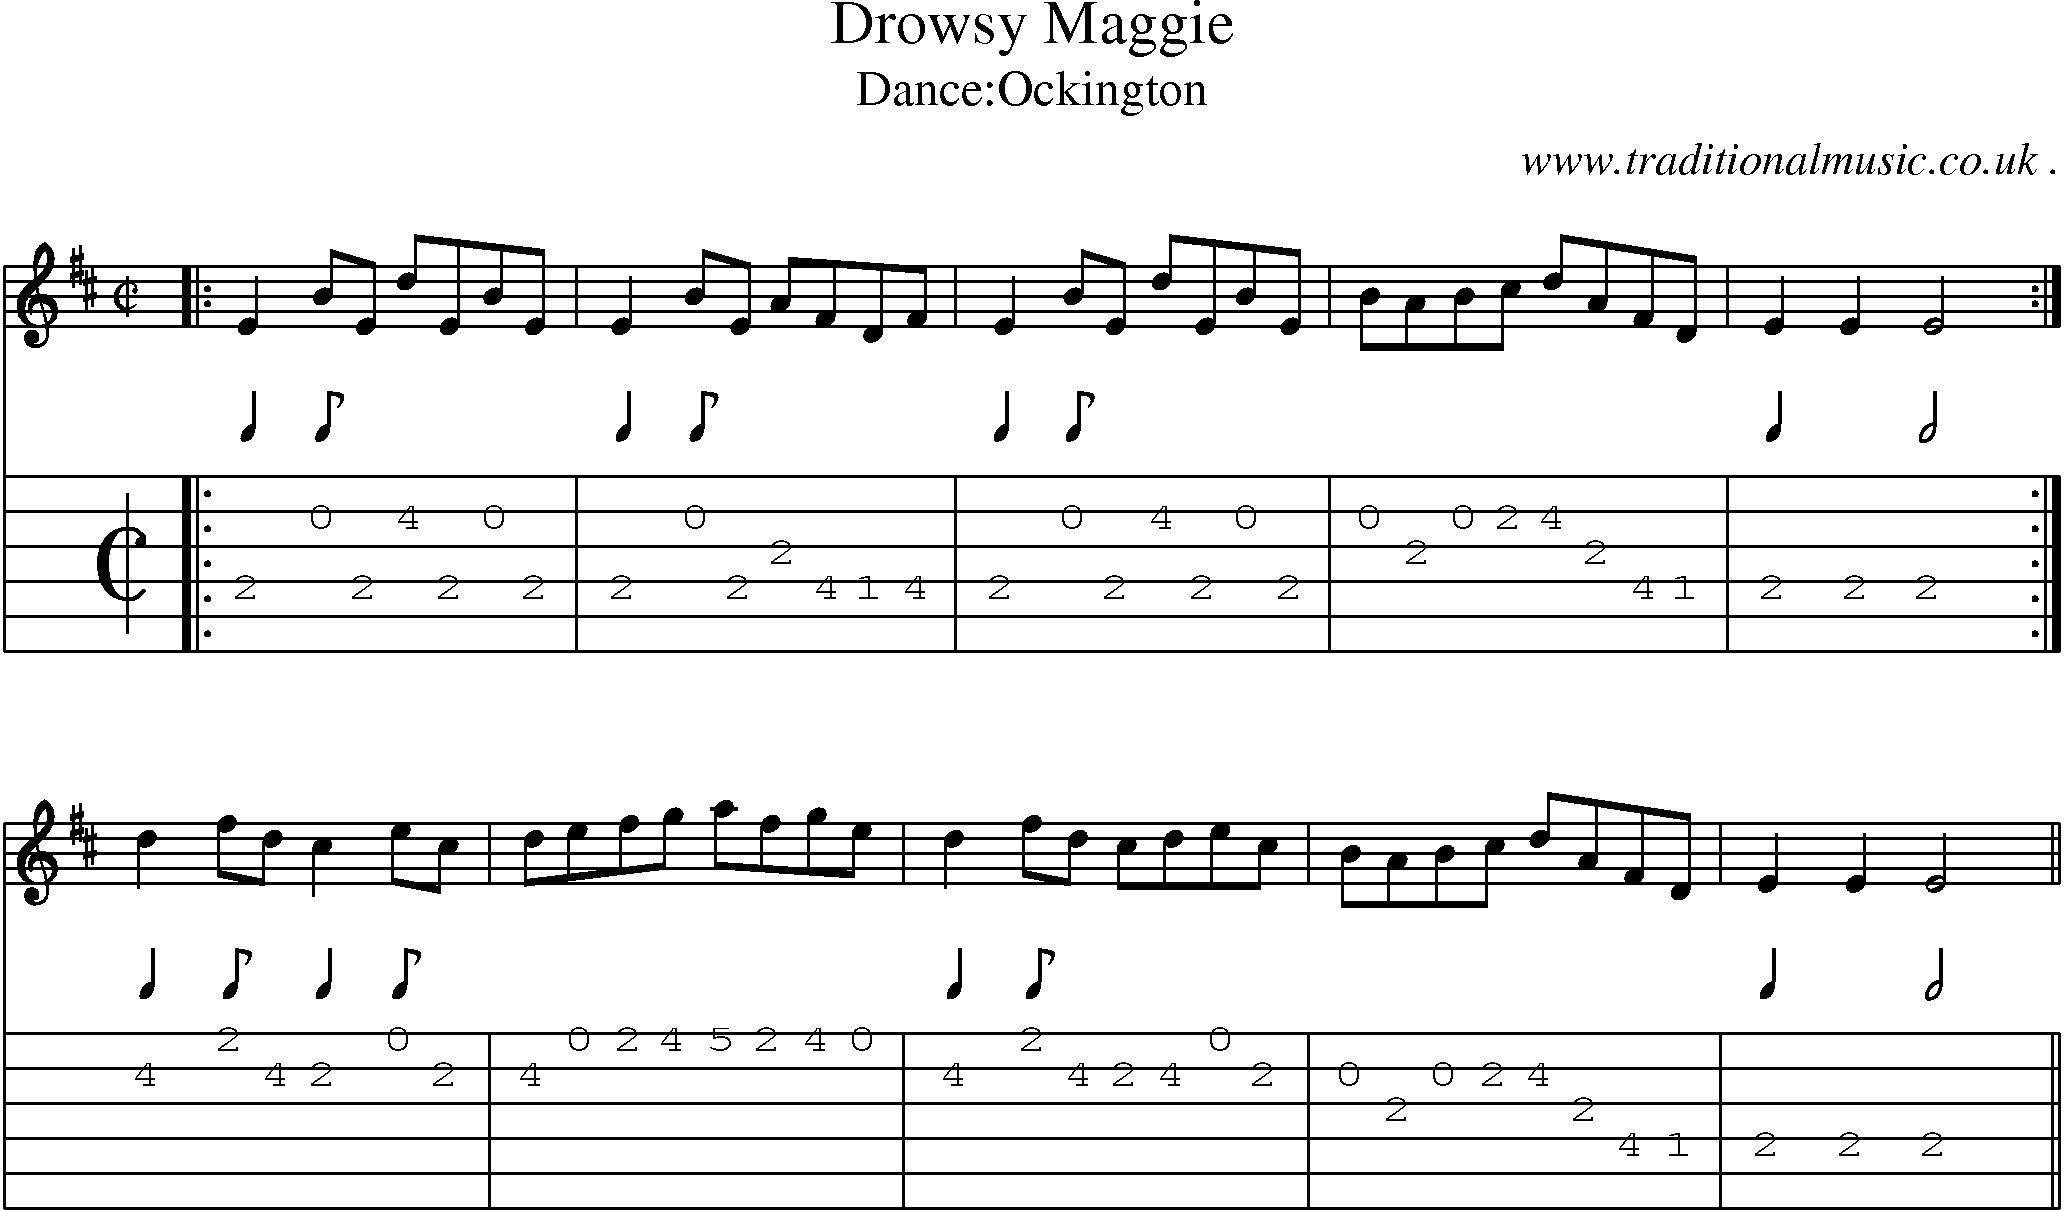 Sheet-Music and Guitar Tabs for Drowsy Maggie